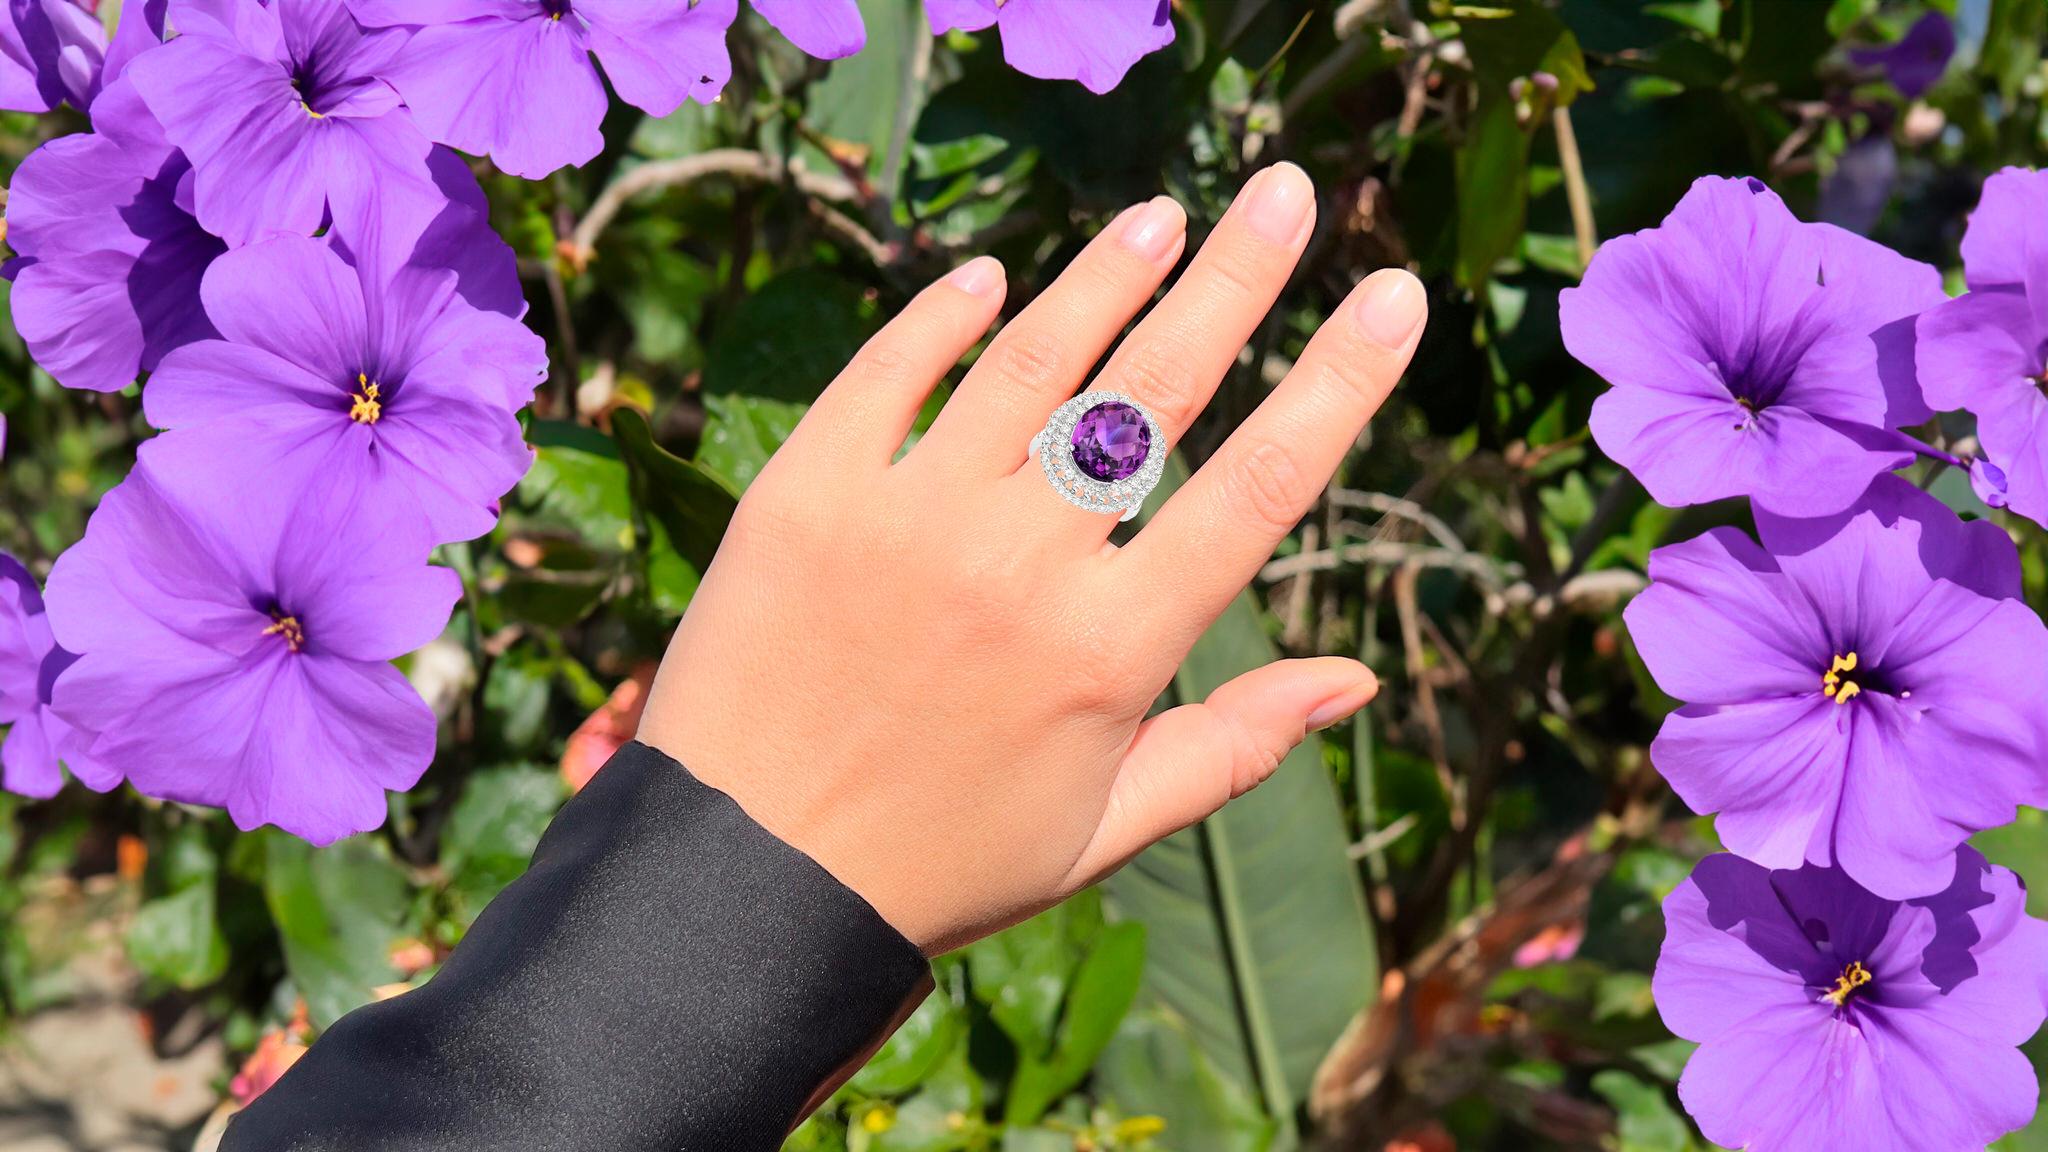 It comes with the Gemological Appraisal by GIA GG/AJP
All Gemstones are Natural
Amethyst = 6.65 Carats
64 White Topazes = 1.80 Carats
Metal: Rhodium Plated Sterling Silver
Ring Size: 6* US
*It can be resized complimentary